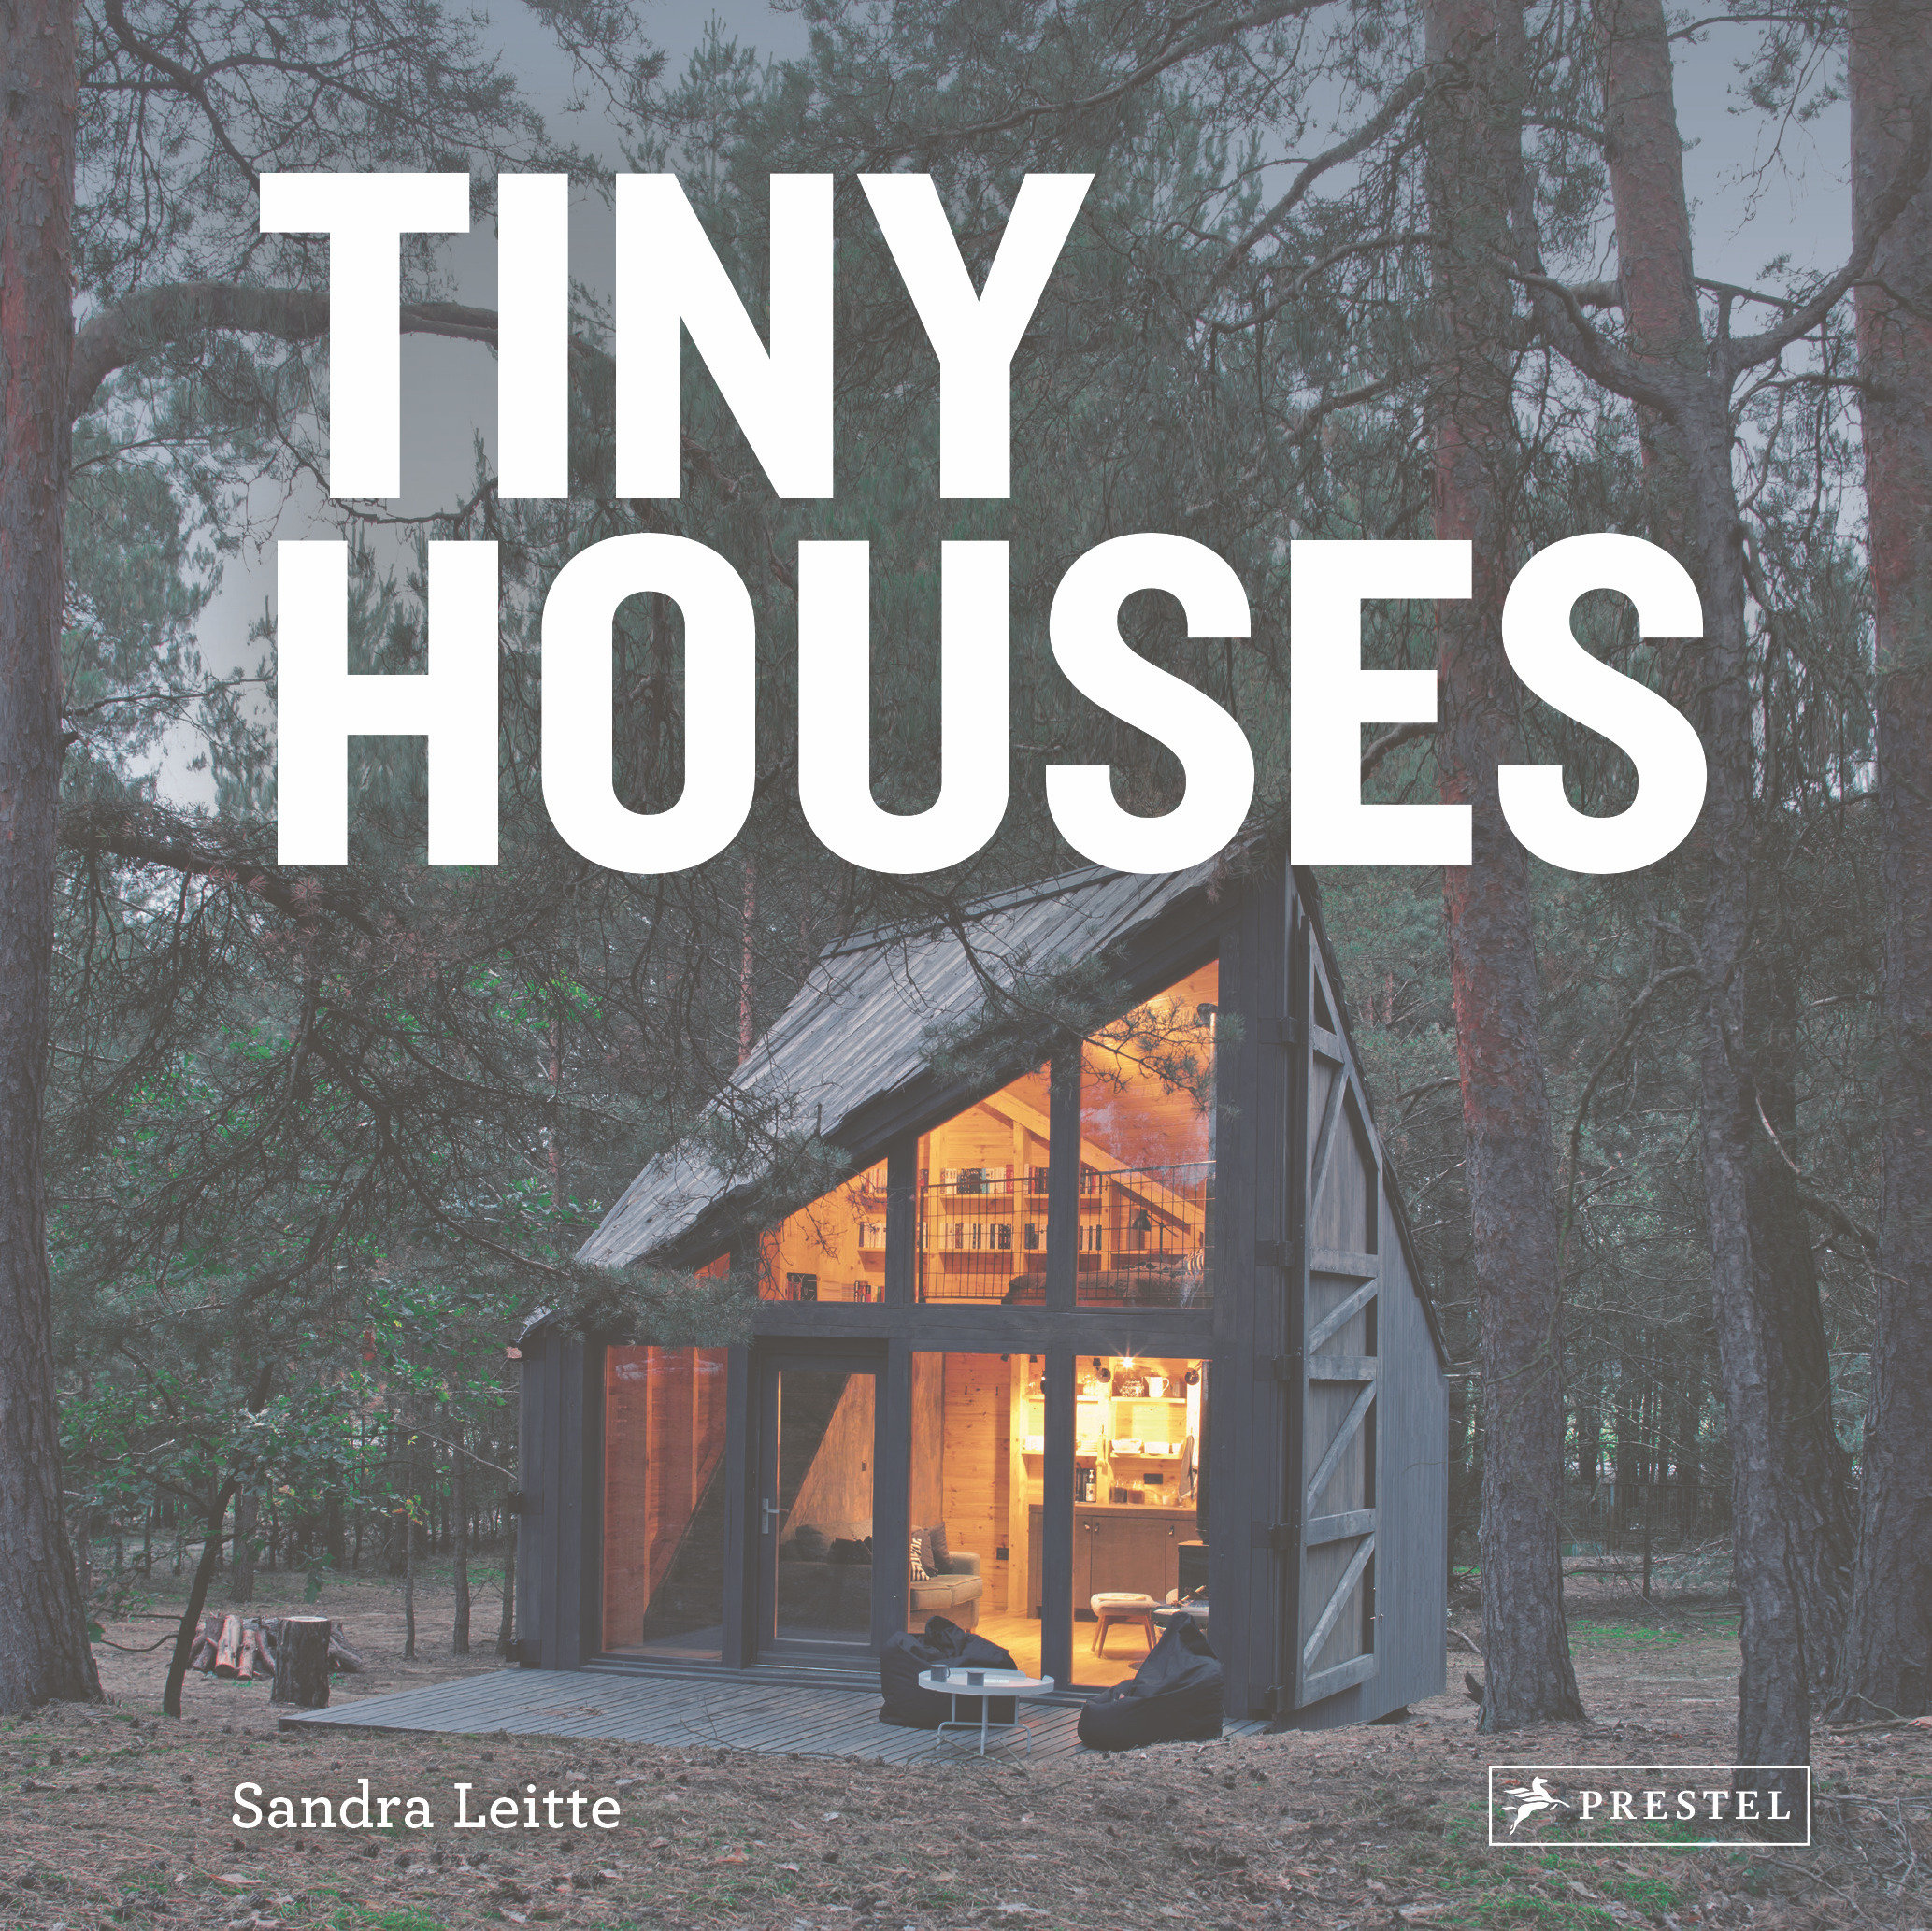 Tiny Houses (Hardcover Book)